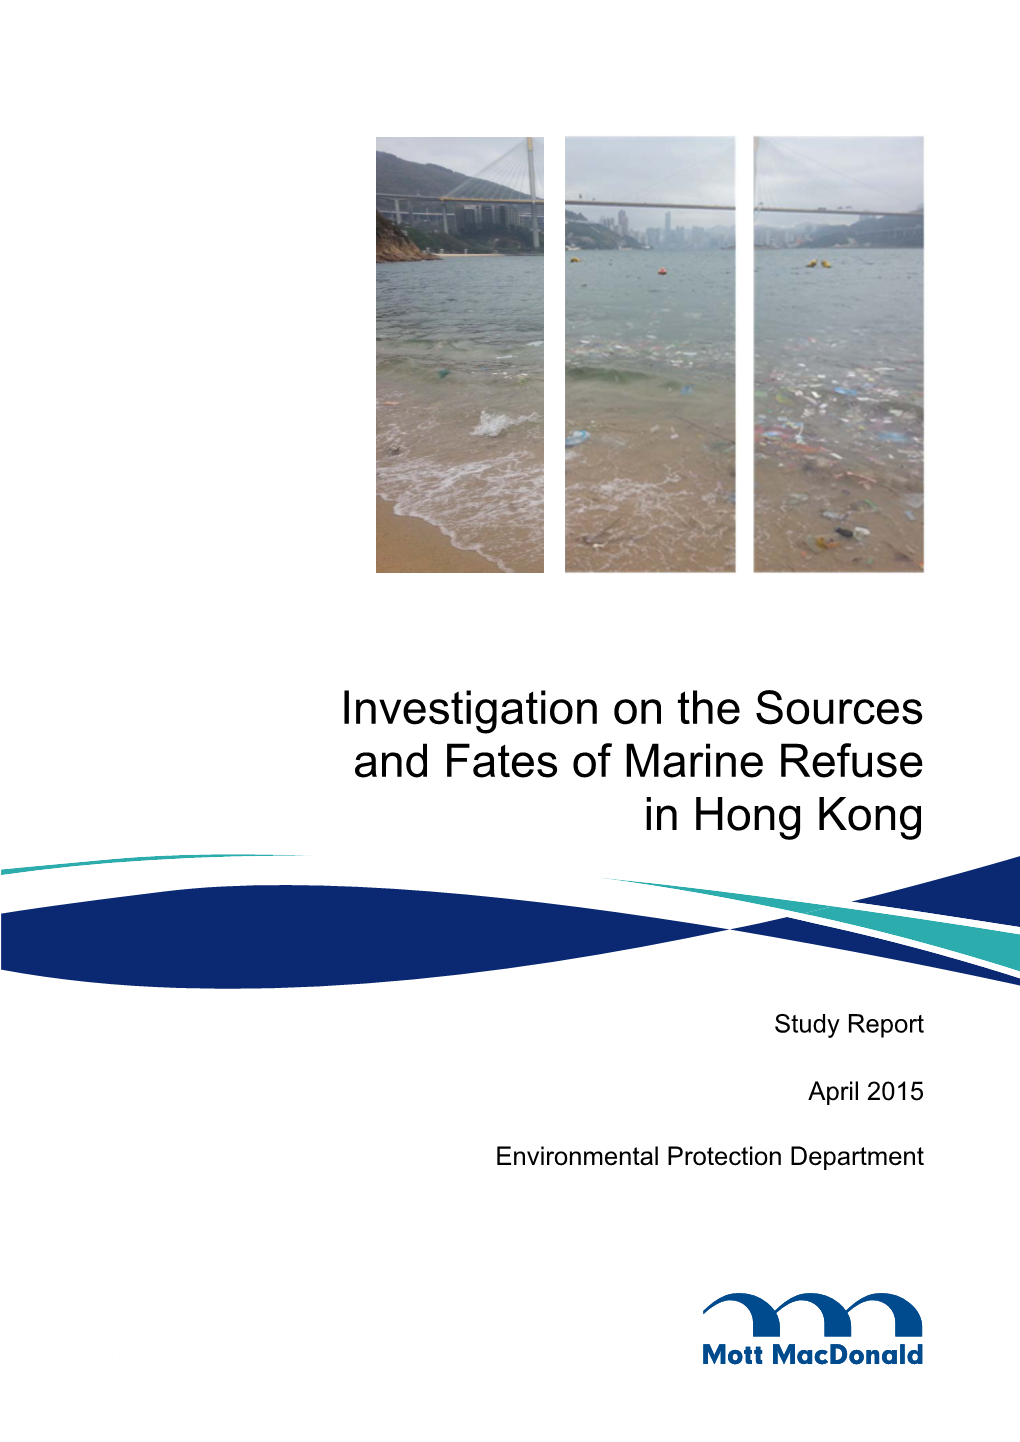 Investigation on the Sources and Fates of Marine Refuse in Hong Kong